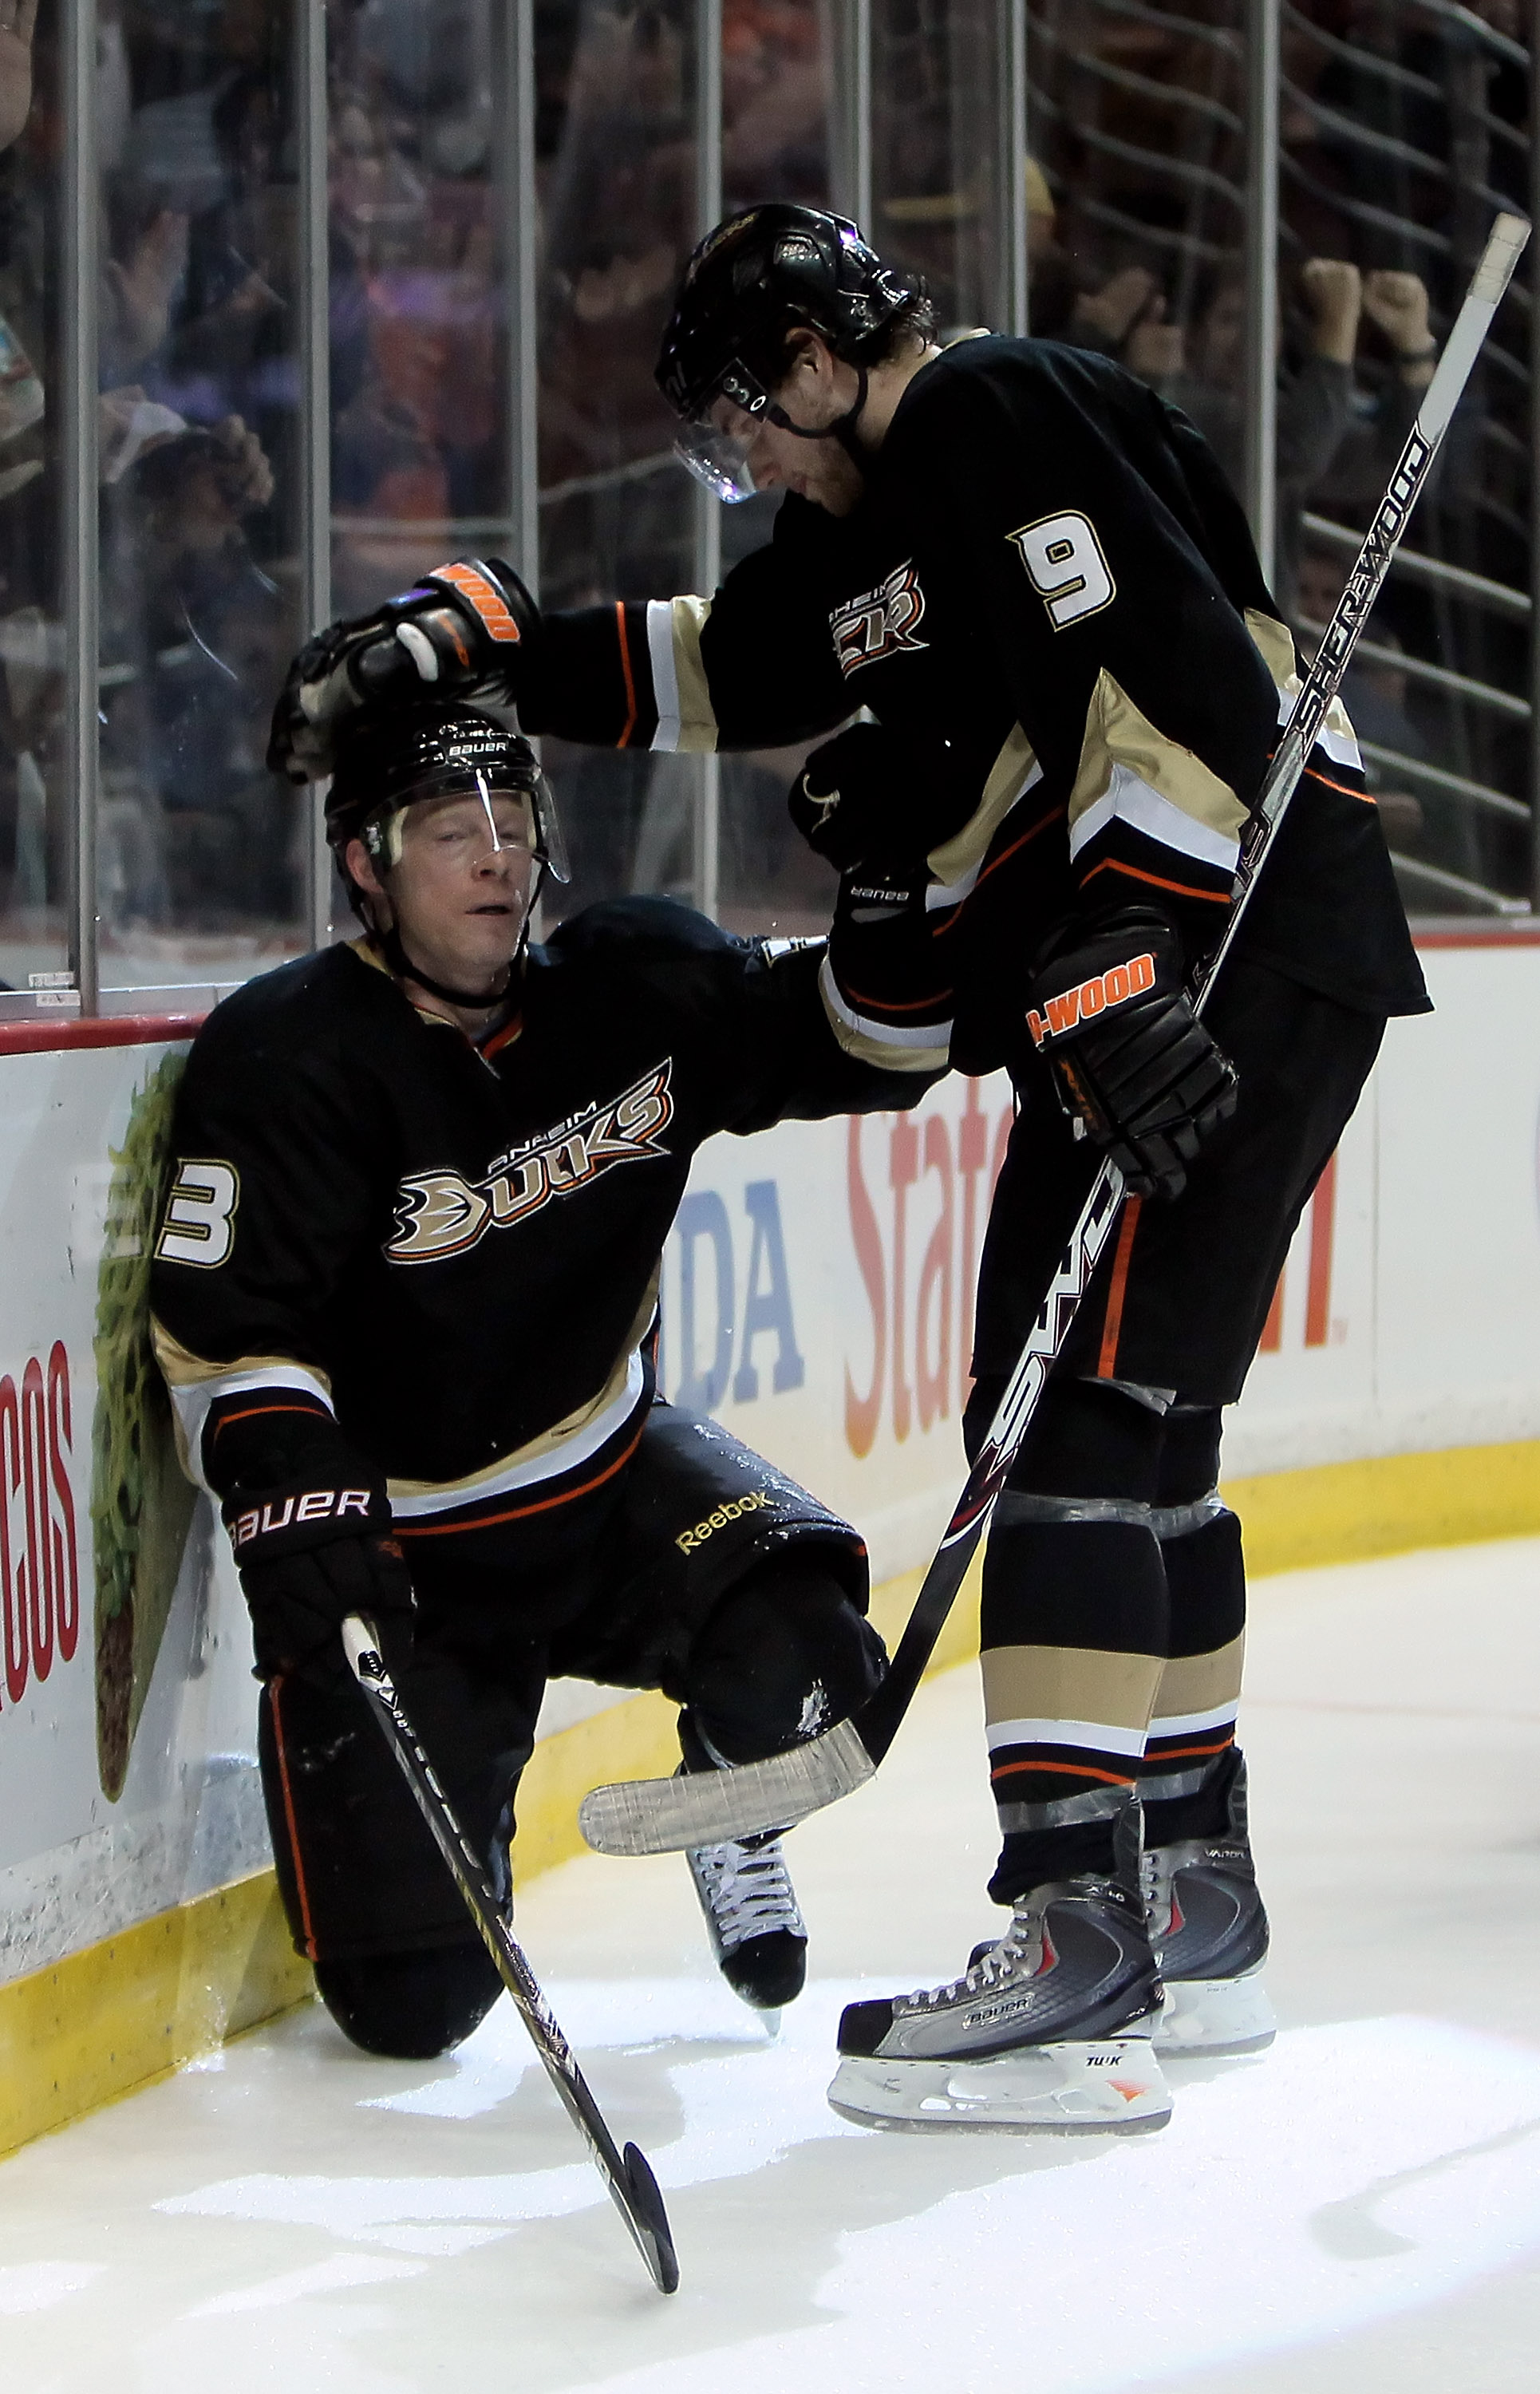 ANAHEIM, CA - MARCH 03:  Jason Blake (L) #33 of the Anaheim Ducks is congratulated by Bobby Ryan #9 after scoring a goal in the first period against the Colorado Avalanche at the Honda Center on March 3, 2010 in Anaheim, California.  (Photo by Jeff Gross/